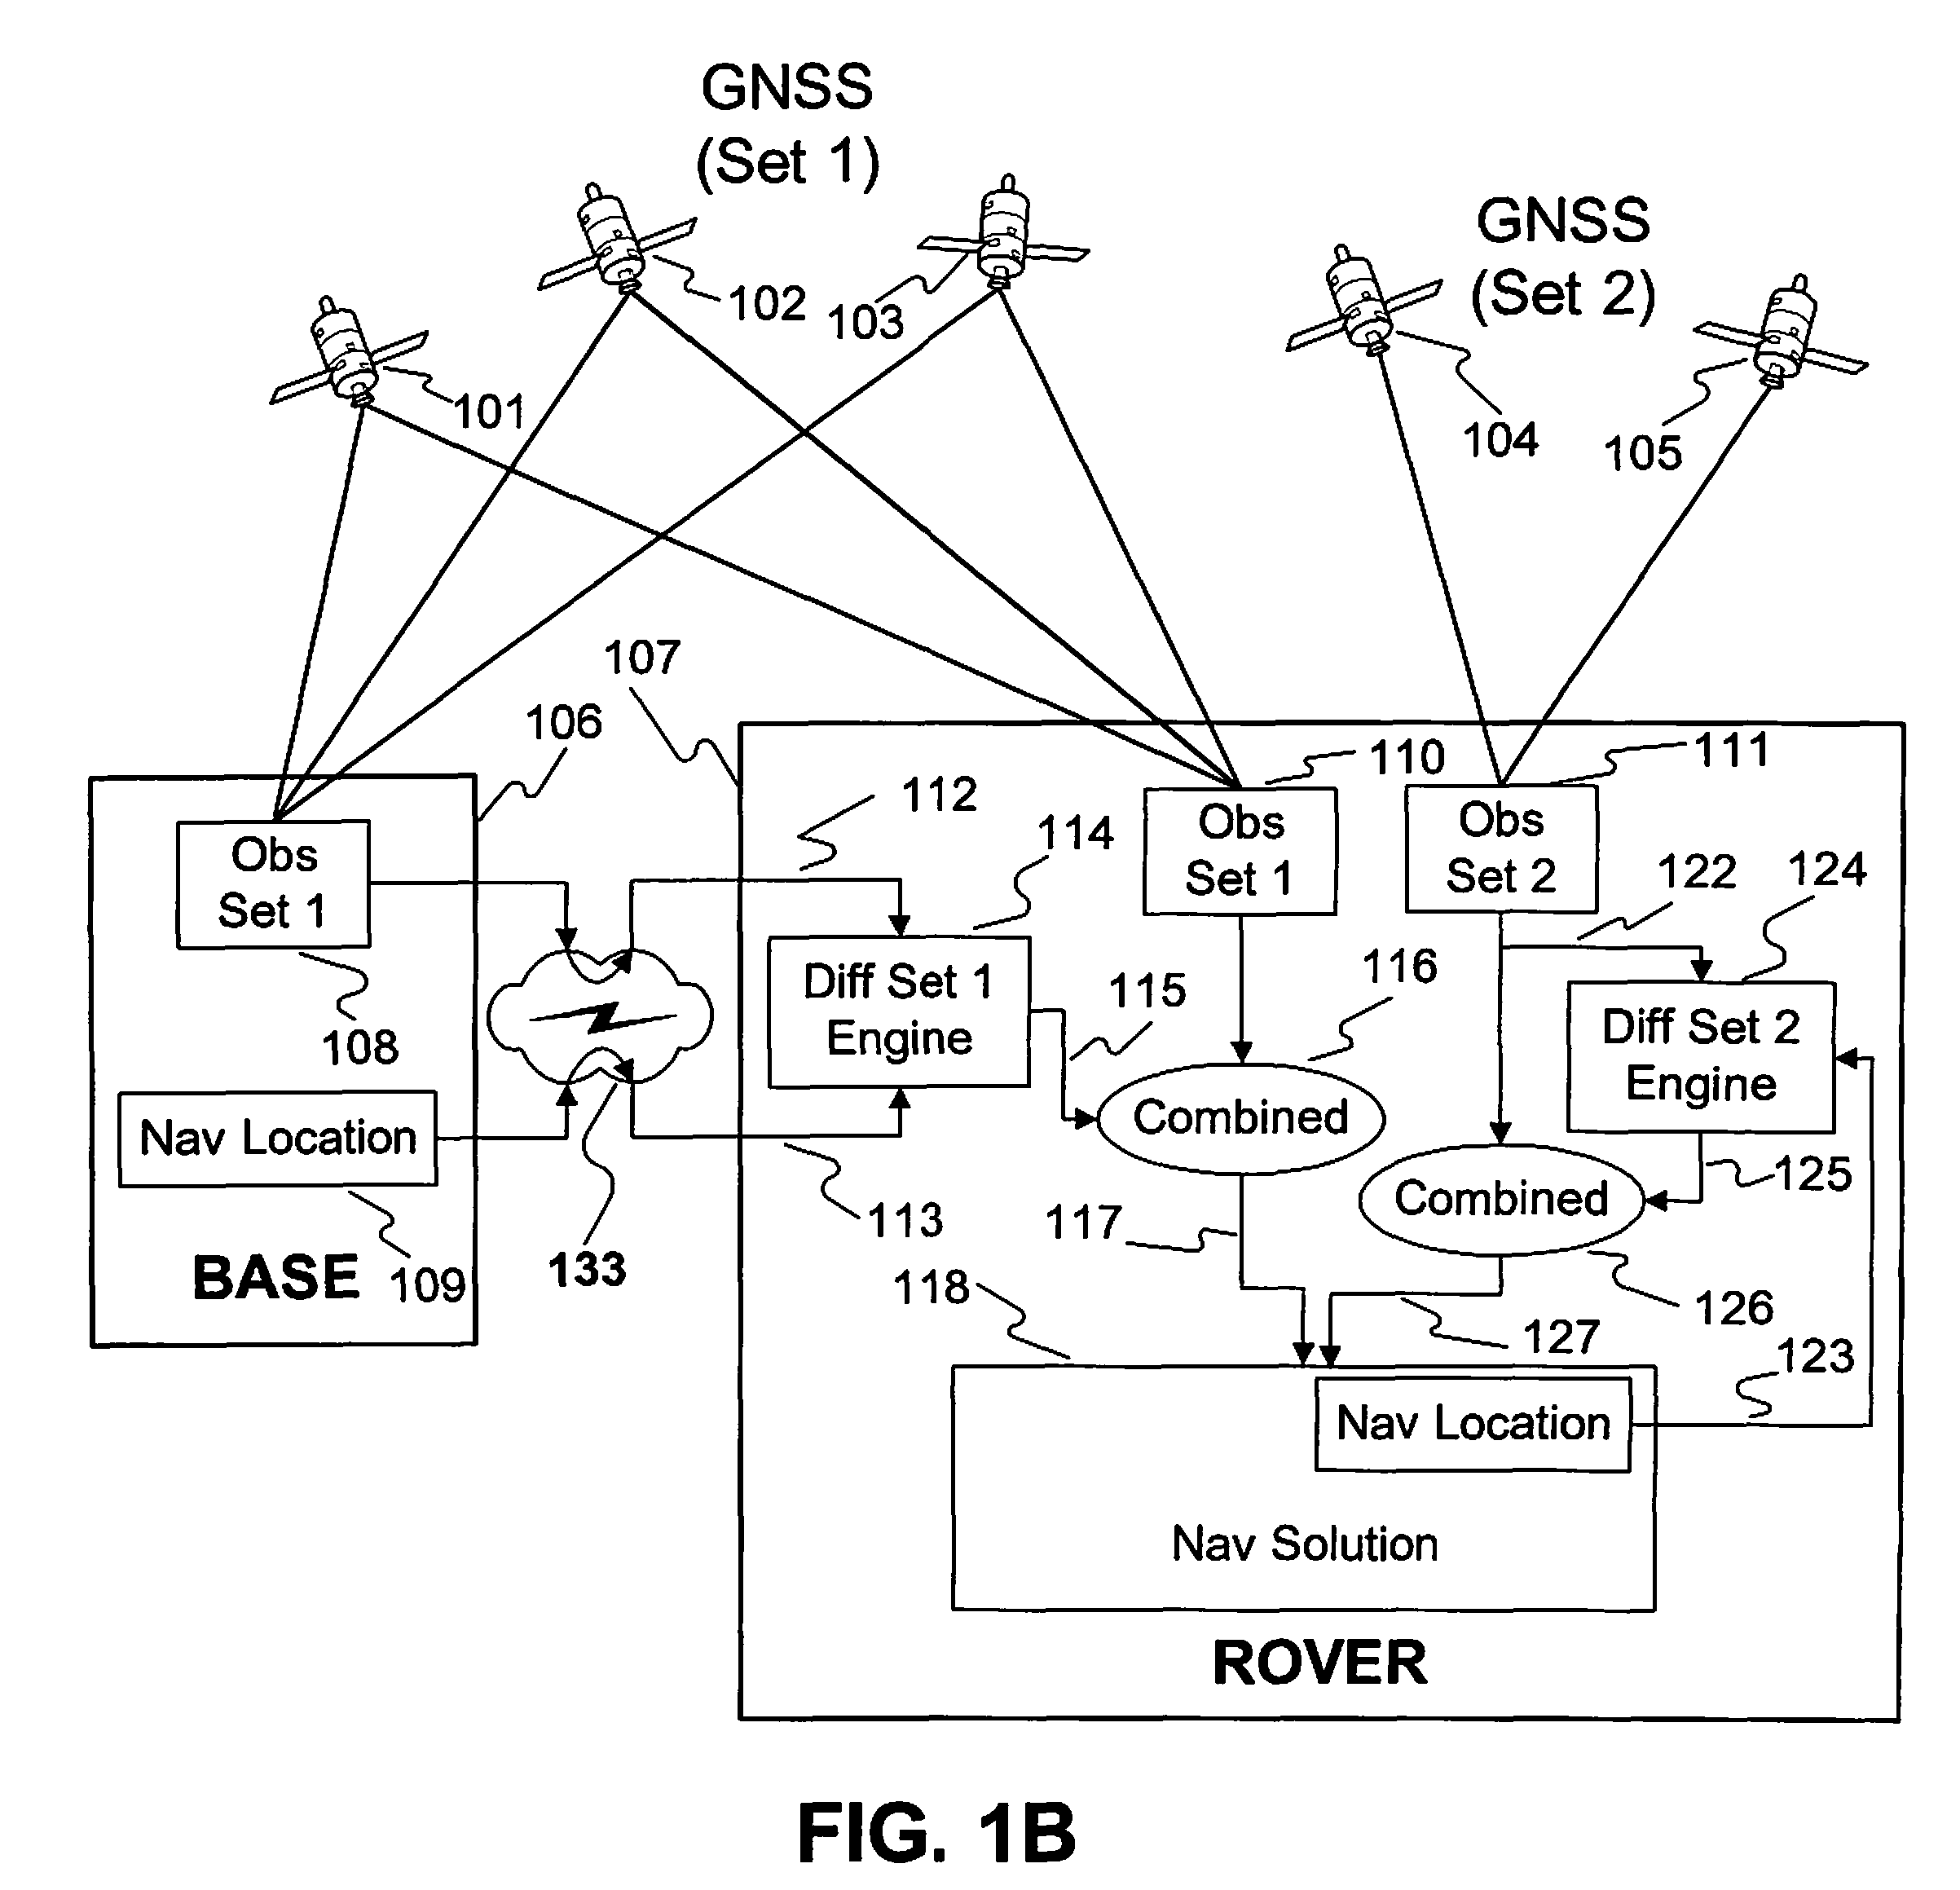 System and method for augmenting DGNSS with internally-generated differential correction